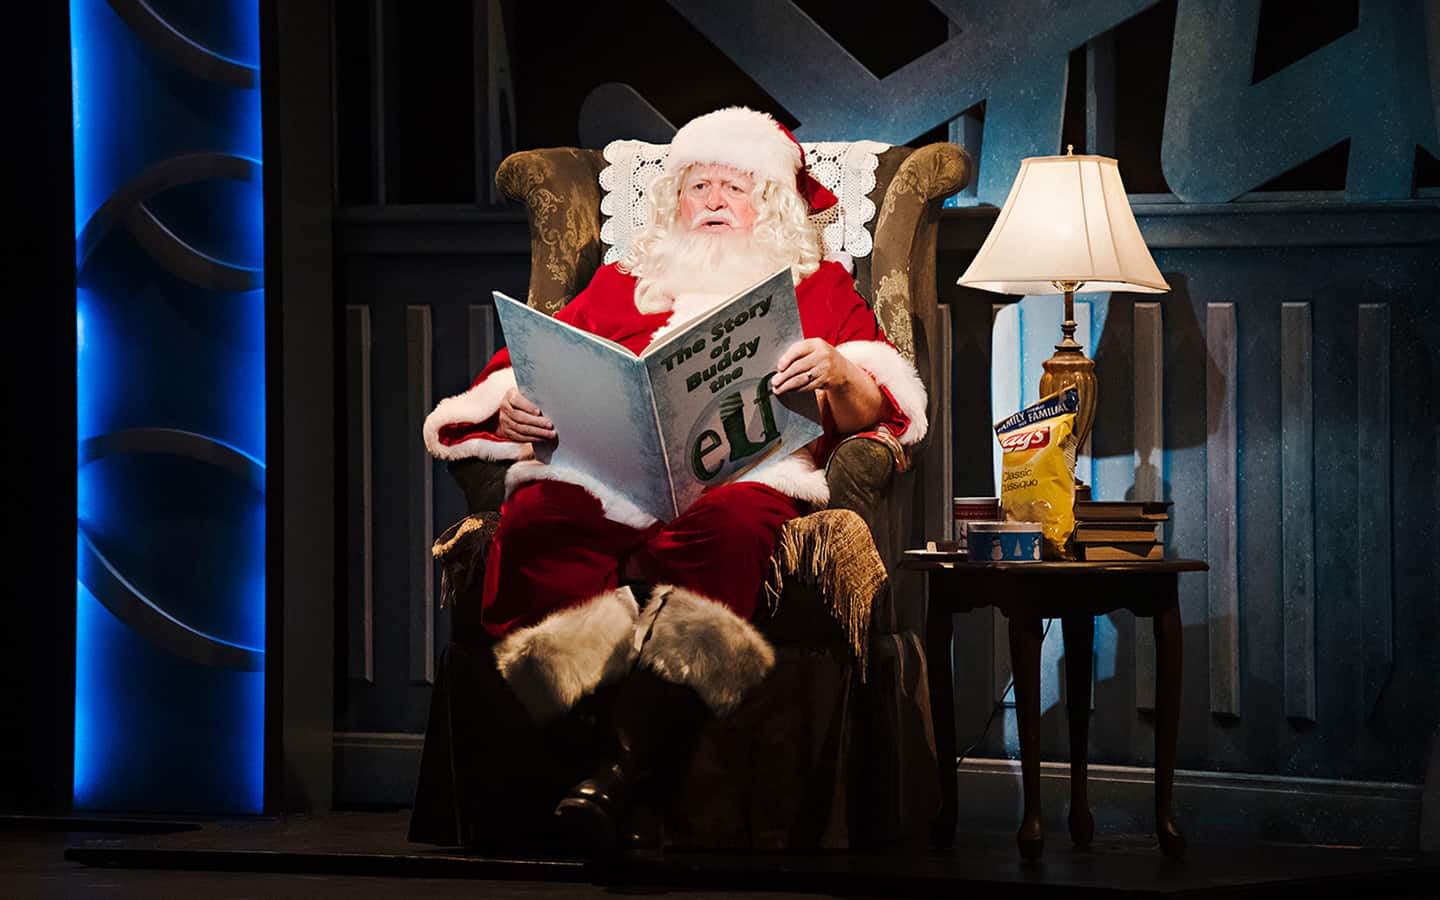 Buddy’s trek from the North Pole brings him to the stage in Cambridge